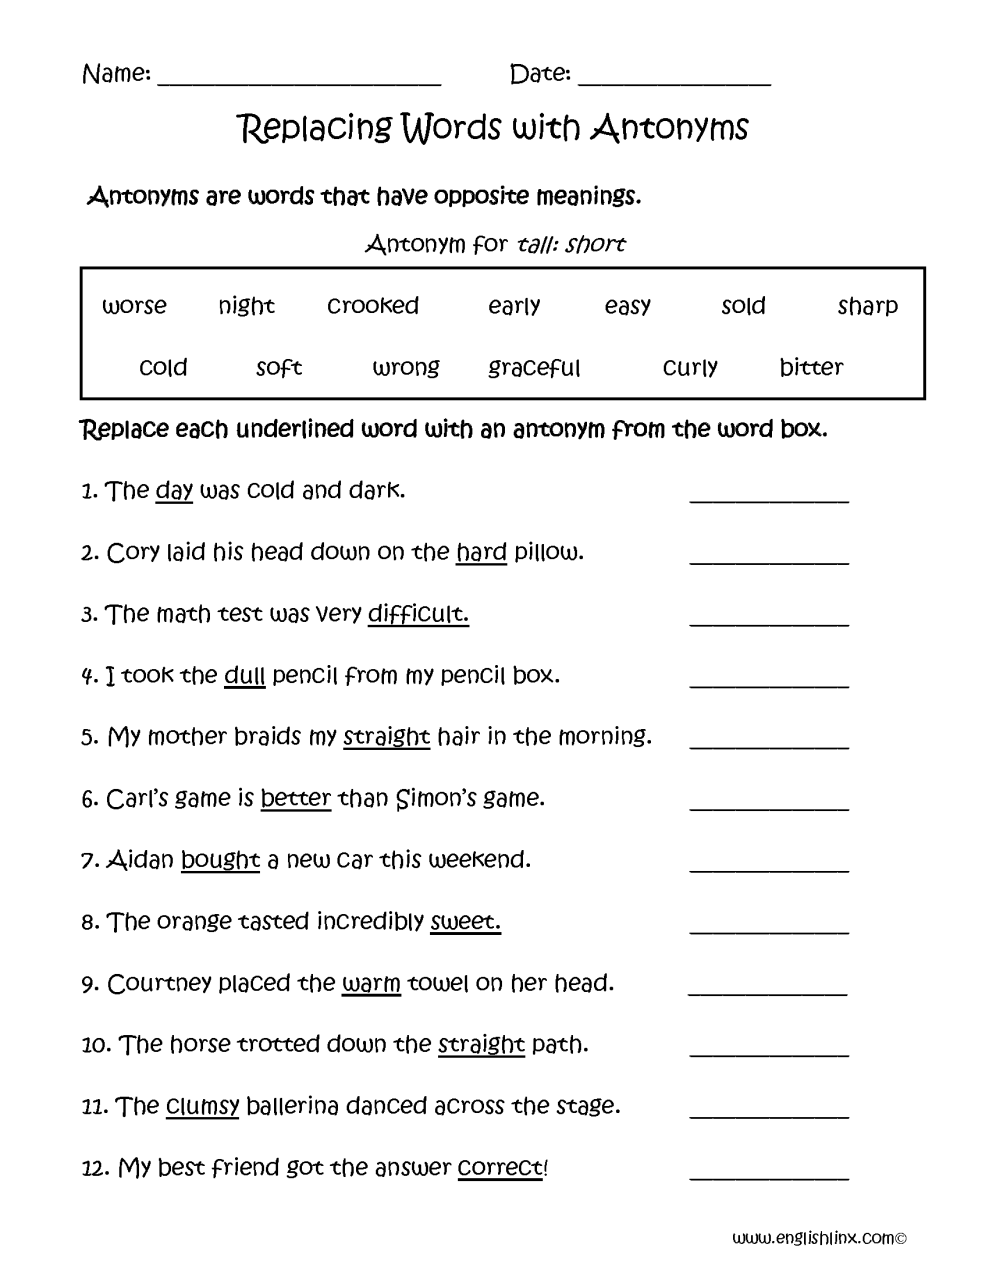 Synonyms And Antonyms Worksheet For Grade 3